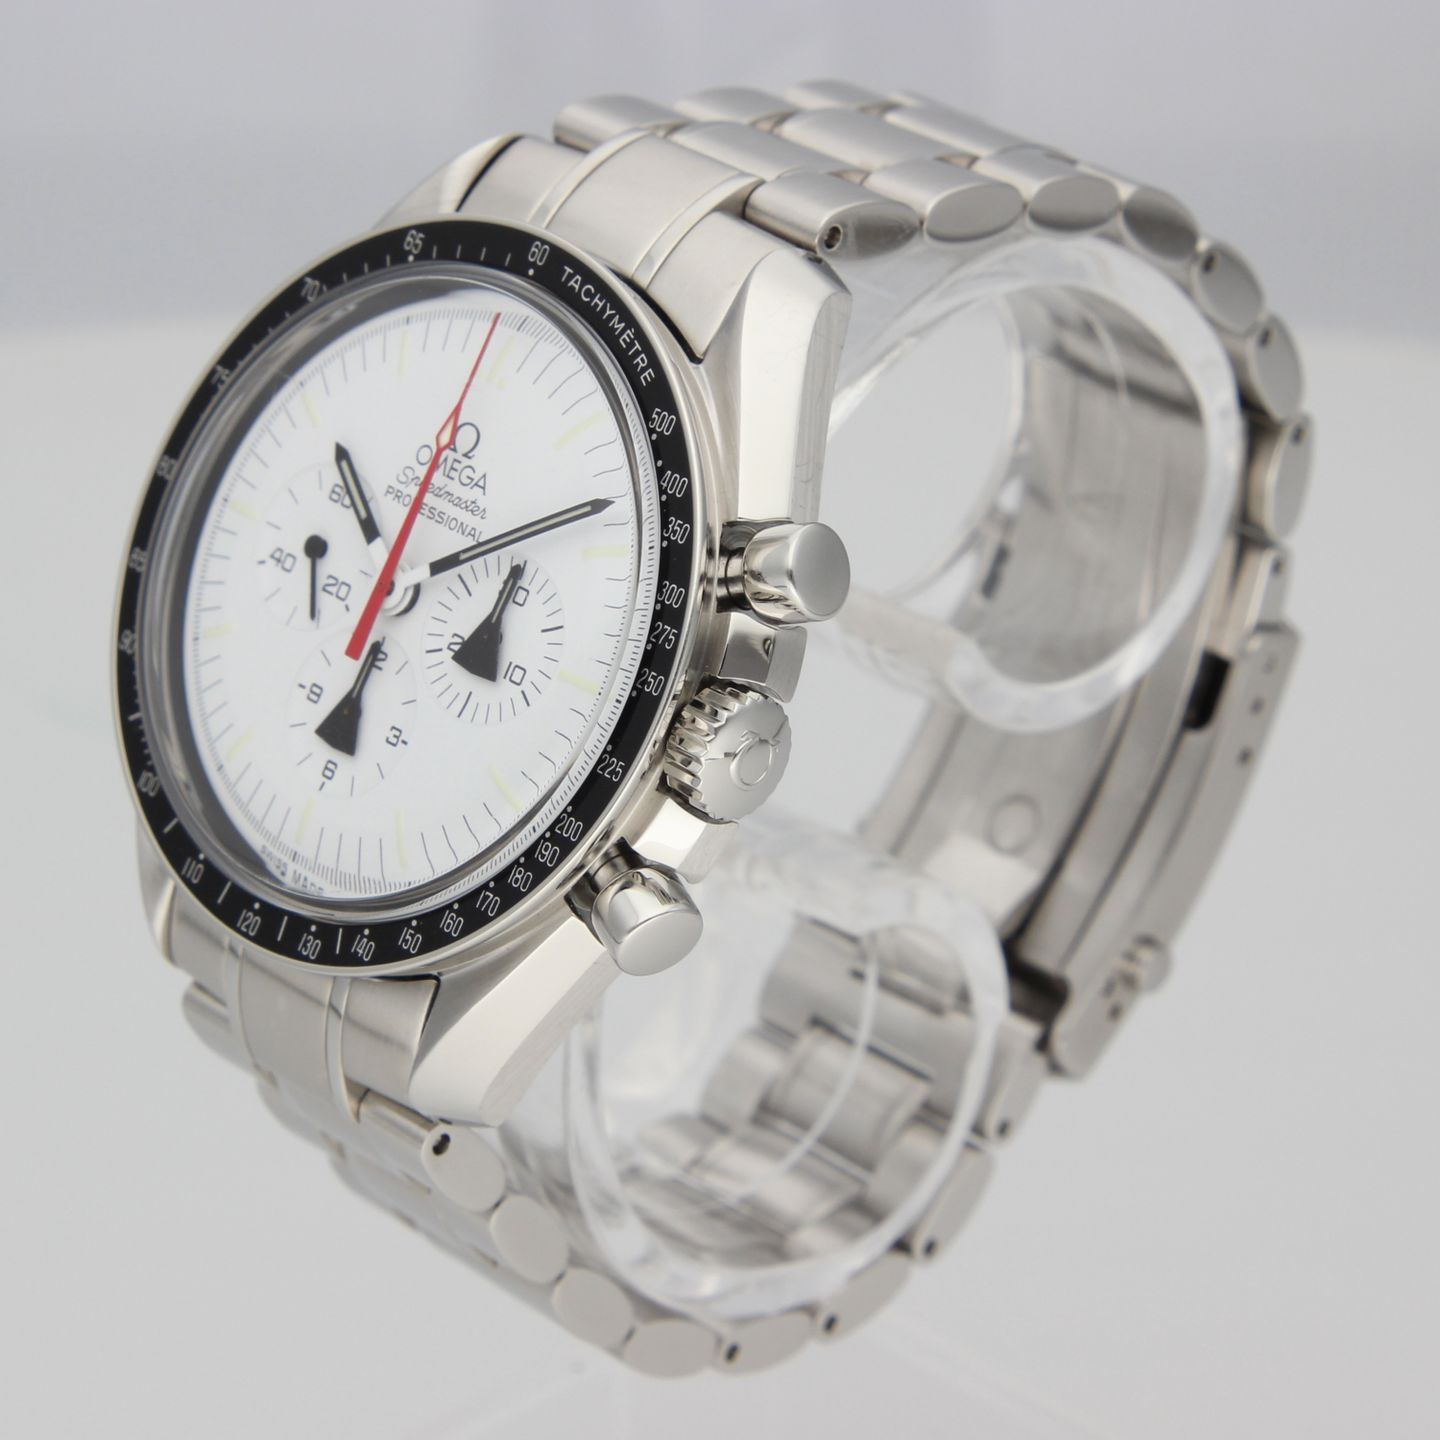 Omega Speedmaster Professional Moonwatch 311.32.42.30.04.001 (2008) - White dial 42 mm Steel case (6/8)